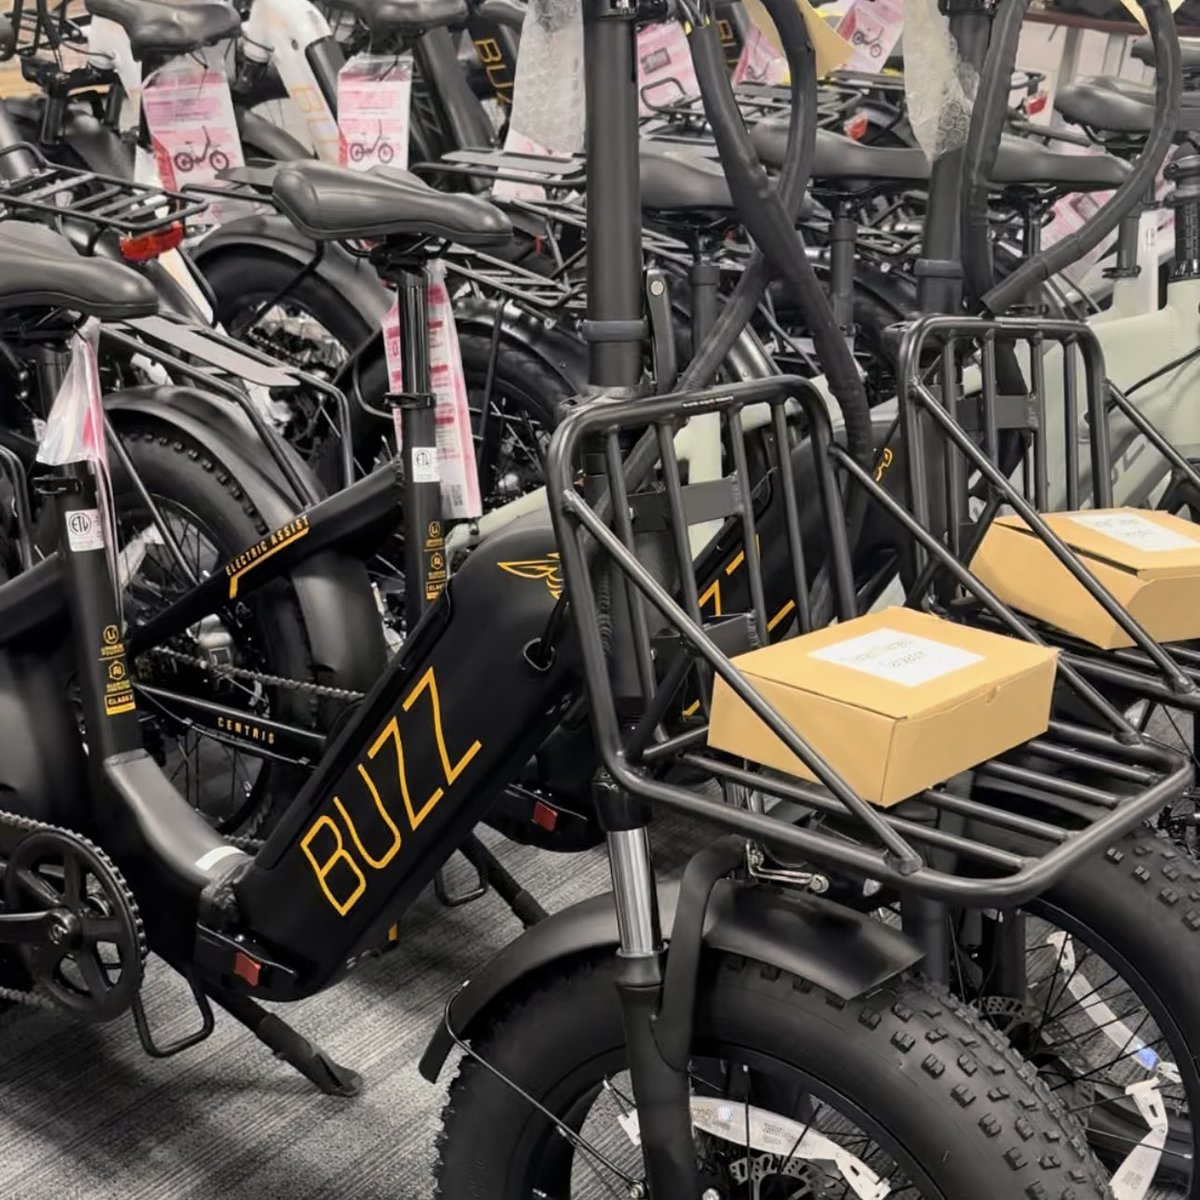 Getting the fleet ready 😎 see you this weekend @Mid_Ohio 👋🏎️ 

#SVRA #ebikes